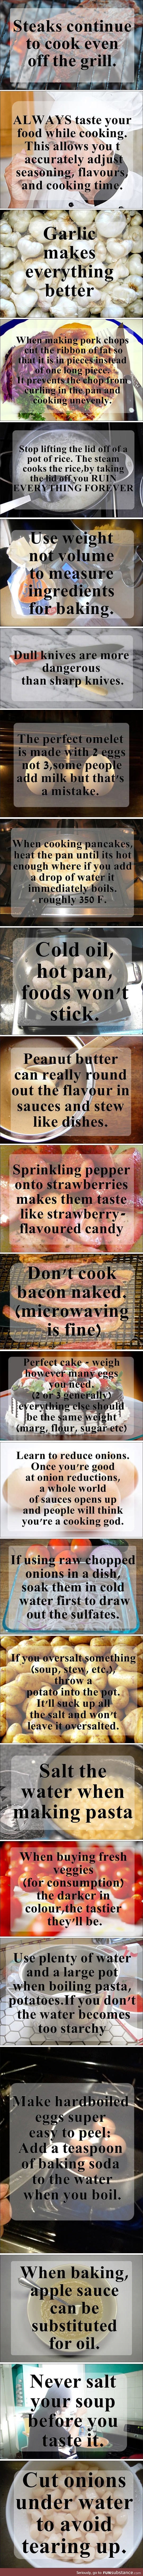 Tricks that everyone should know about cooking